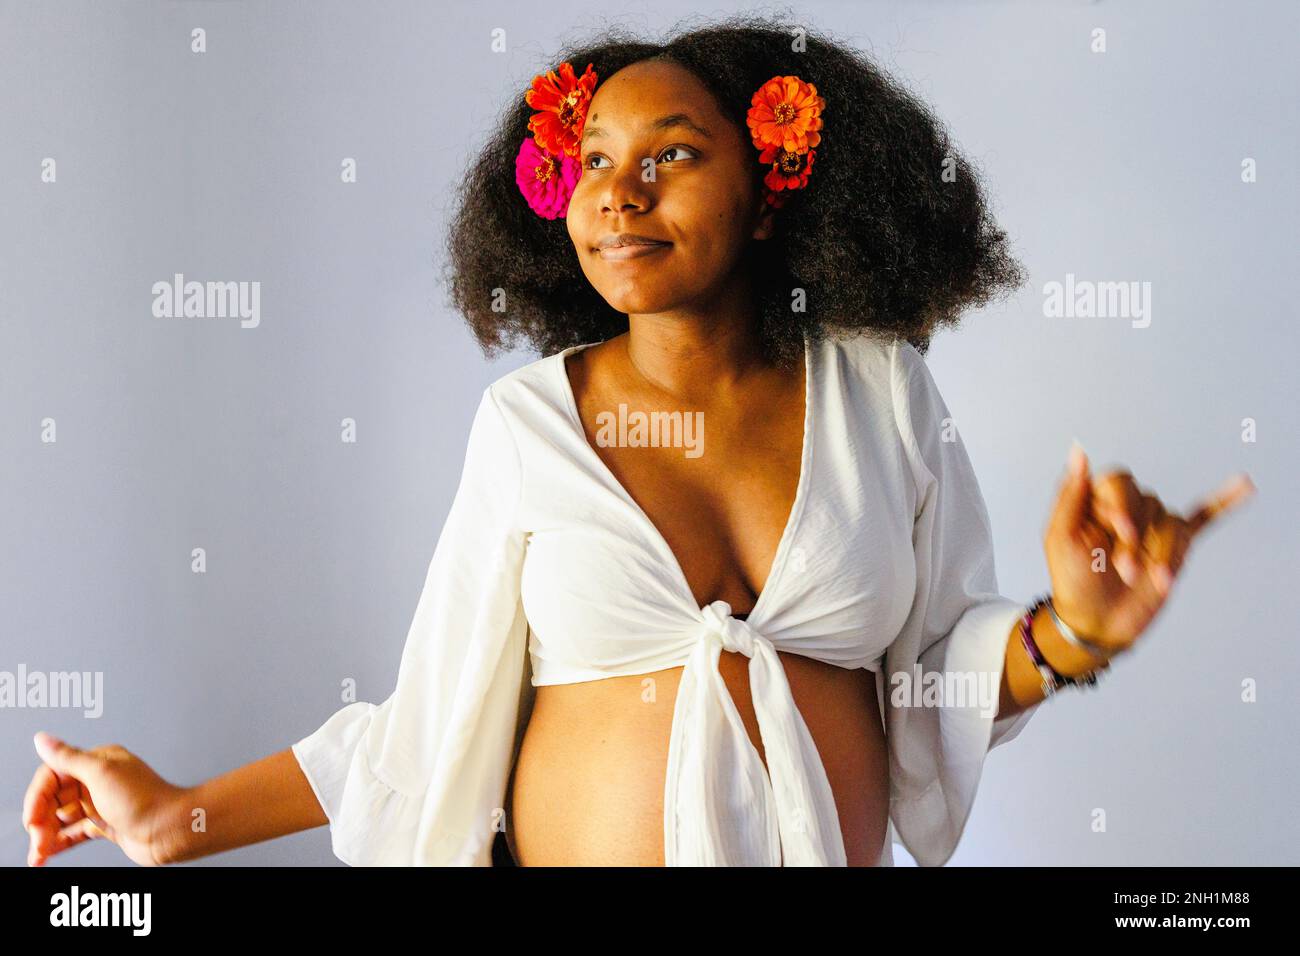 Top-half of pregnant woman dancing with flowers in hair Stock Photo